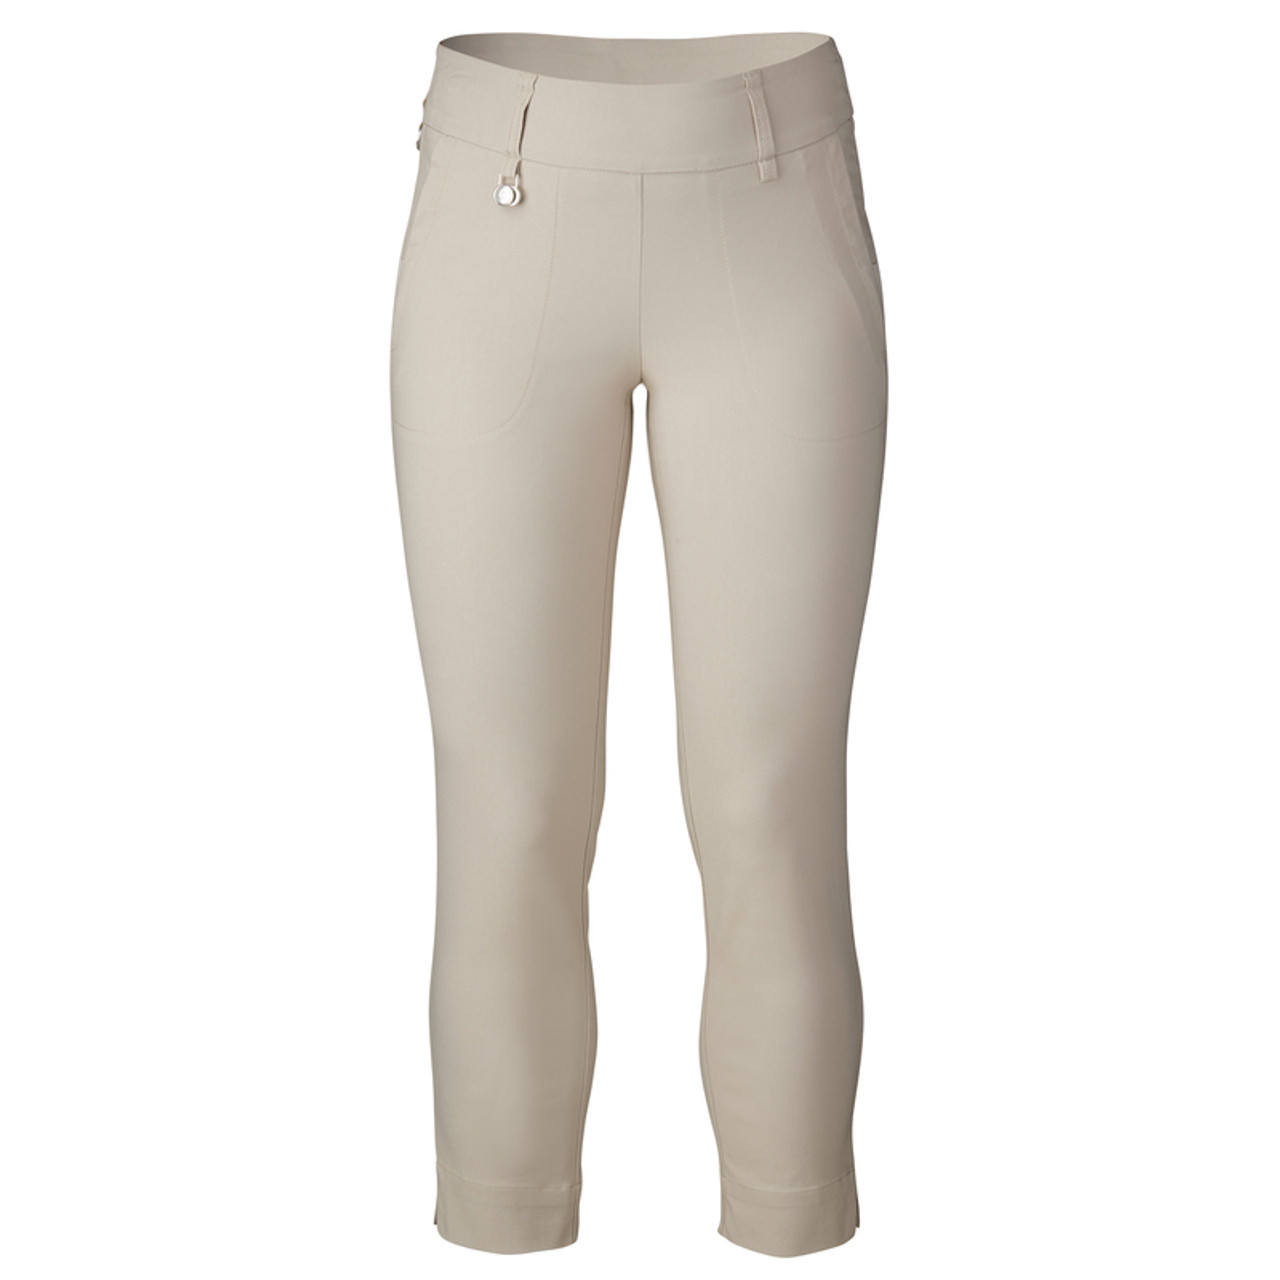 Daily Sports Magic High Water Ankle Pants - Sandy Beige - Fore Ladies -  Golf Dresses and Clothes, Tennis Skirts and Outfits, and Fashionable  Activewear